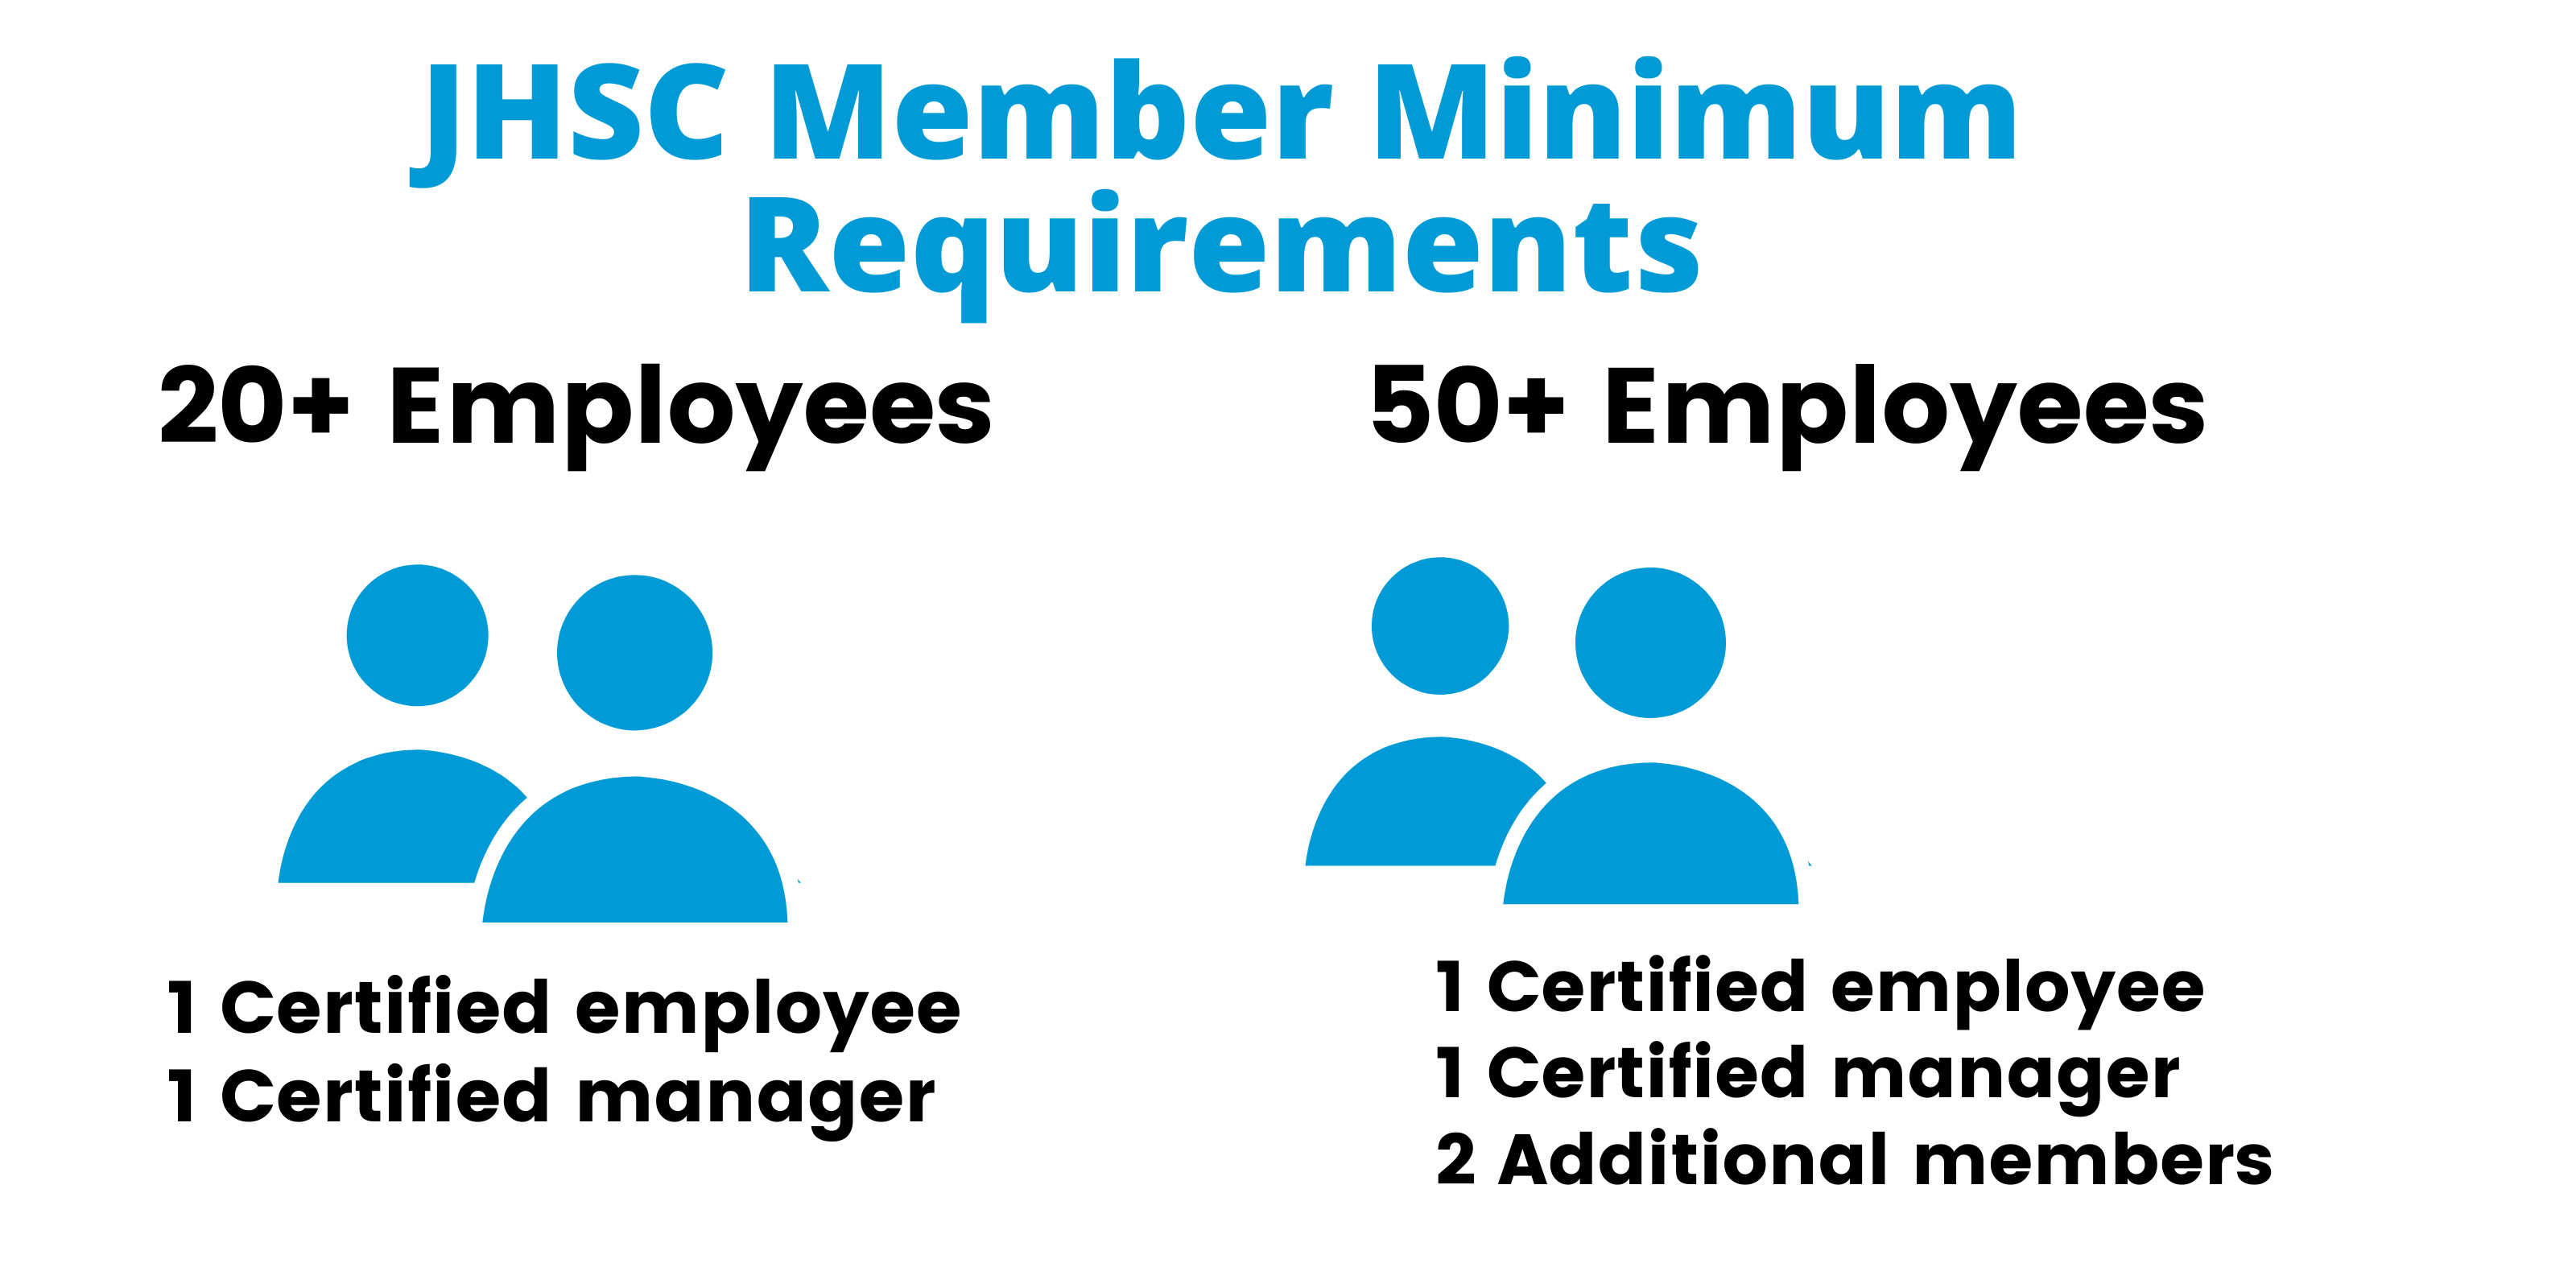 JHSC member minimum requirements based on organization size: 20+ employees: 1 certified employee and 1 certified manager 50+ employees: 1 certified employee, 1 certified manager, two additional members